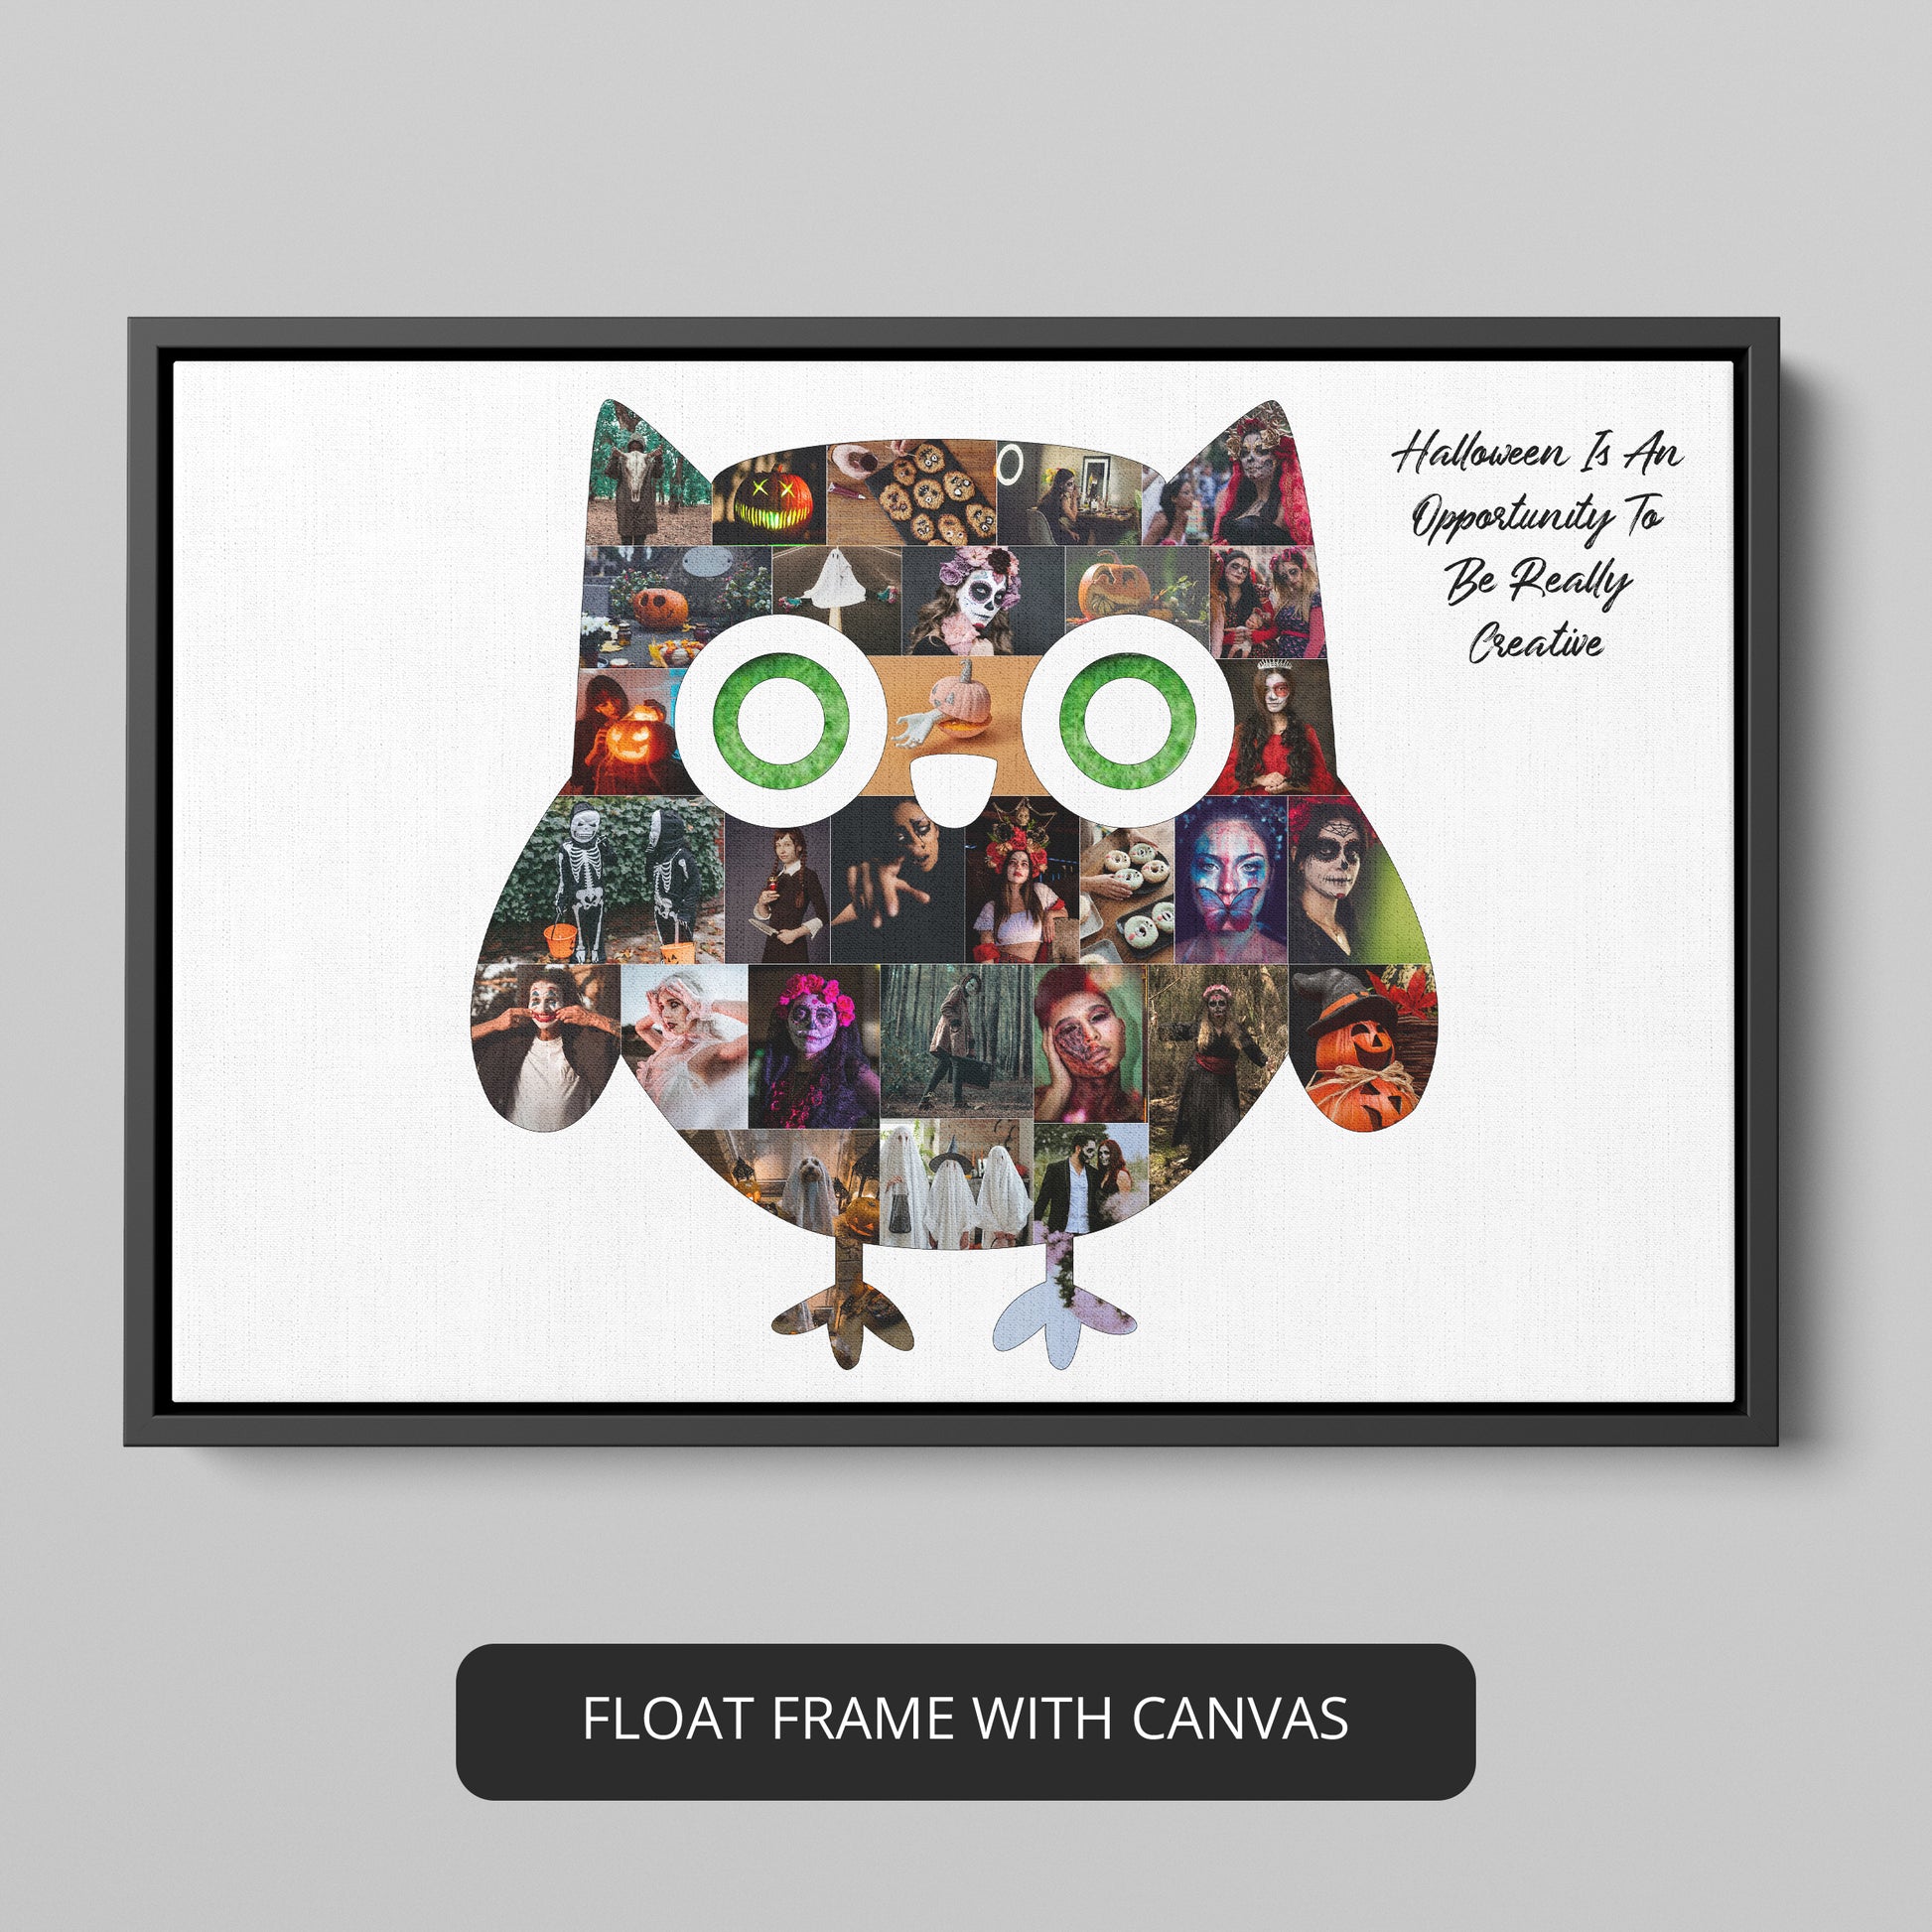 Cute Owl Gifts - Customizable Halloween Themed Photo Collage